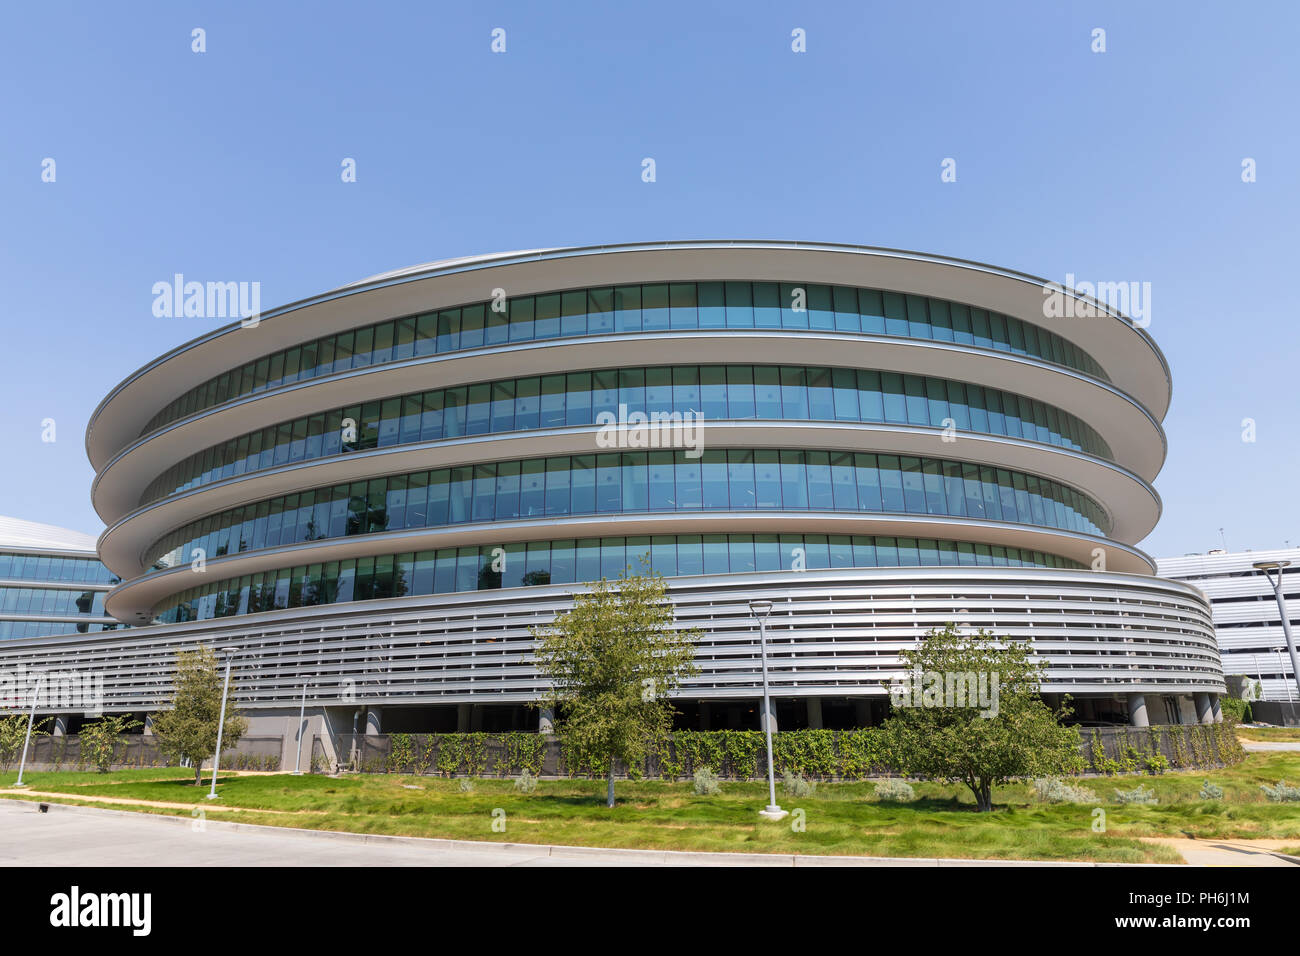 Apple's Central & Wolfe Campus (AC3), Sunnyvale, California Stock Photo